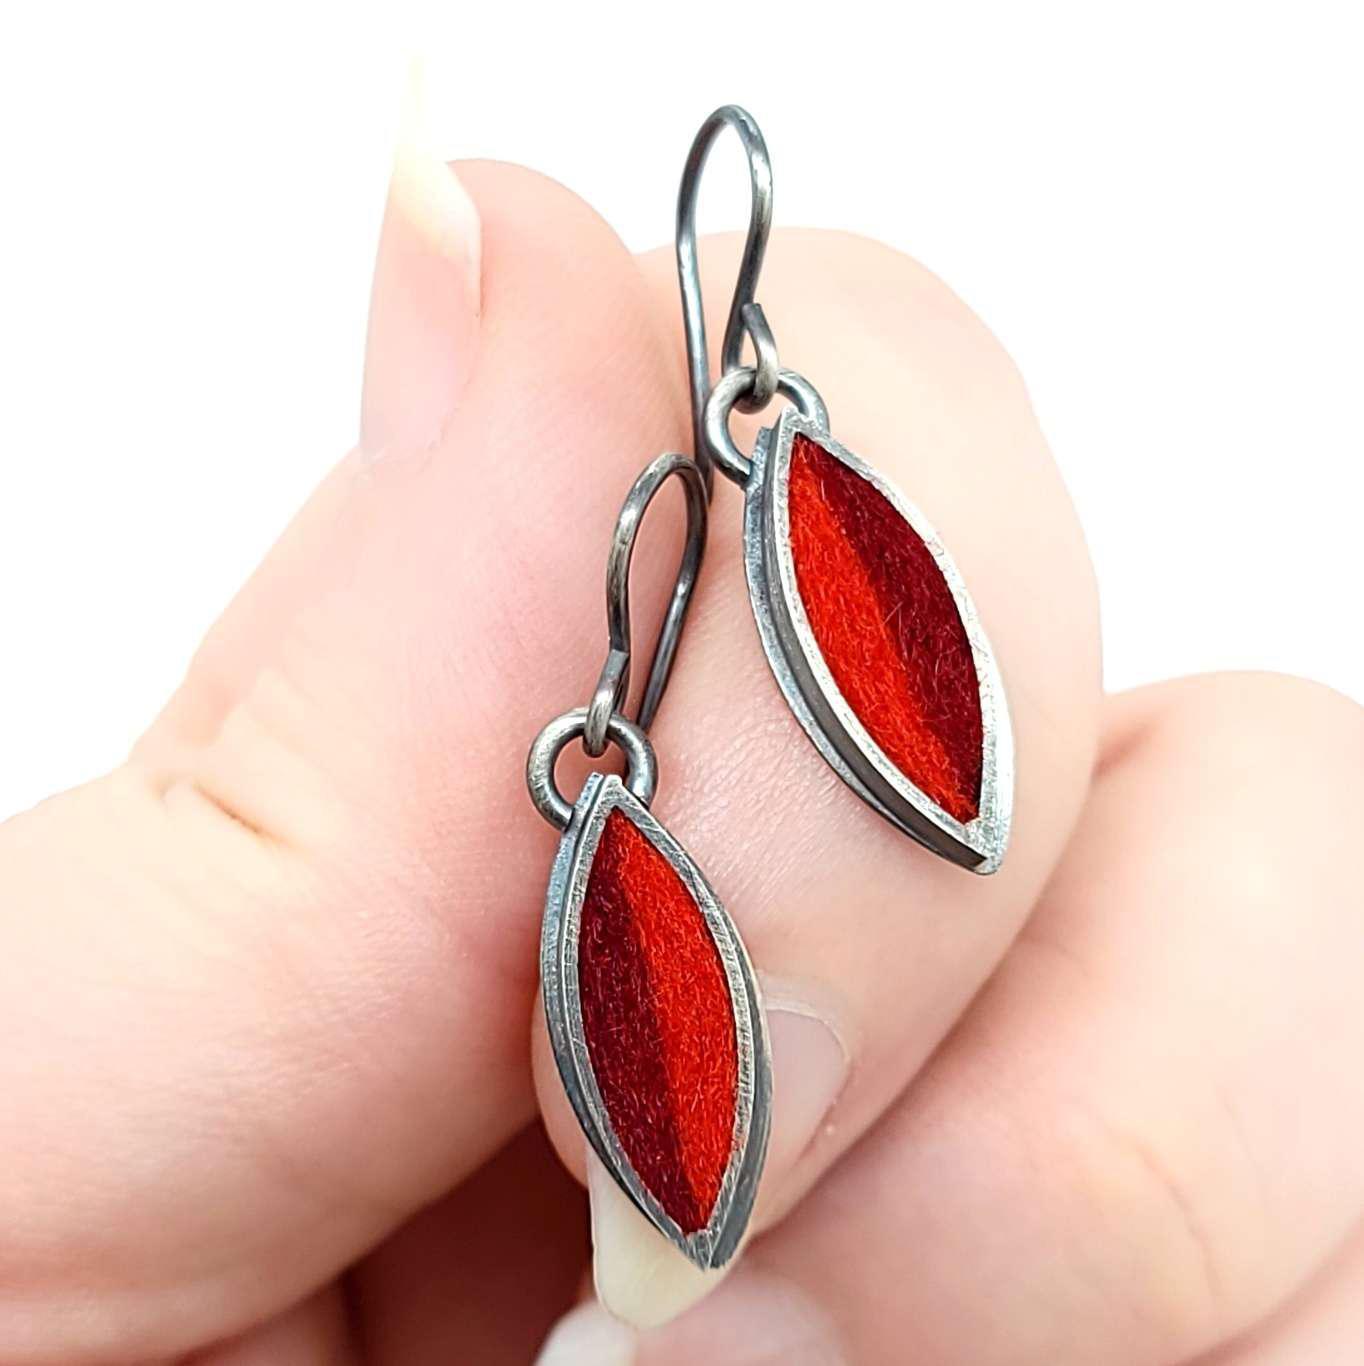 Earrings - Small Single Leaf Drops in Cranberry and Persimmon by Michele A. Friedman